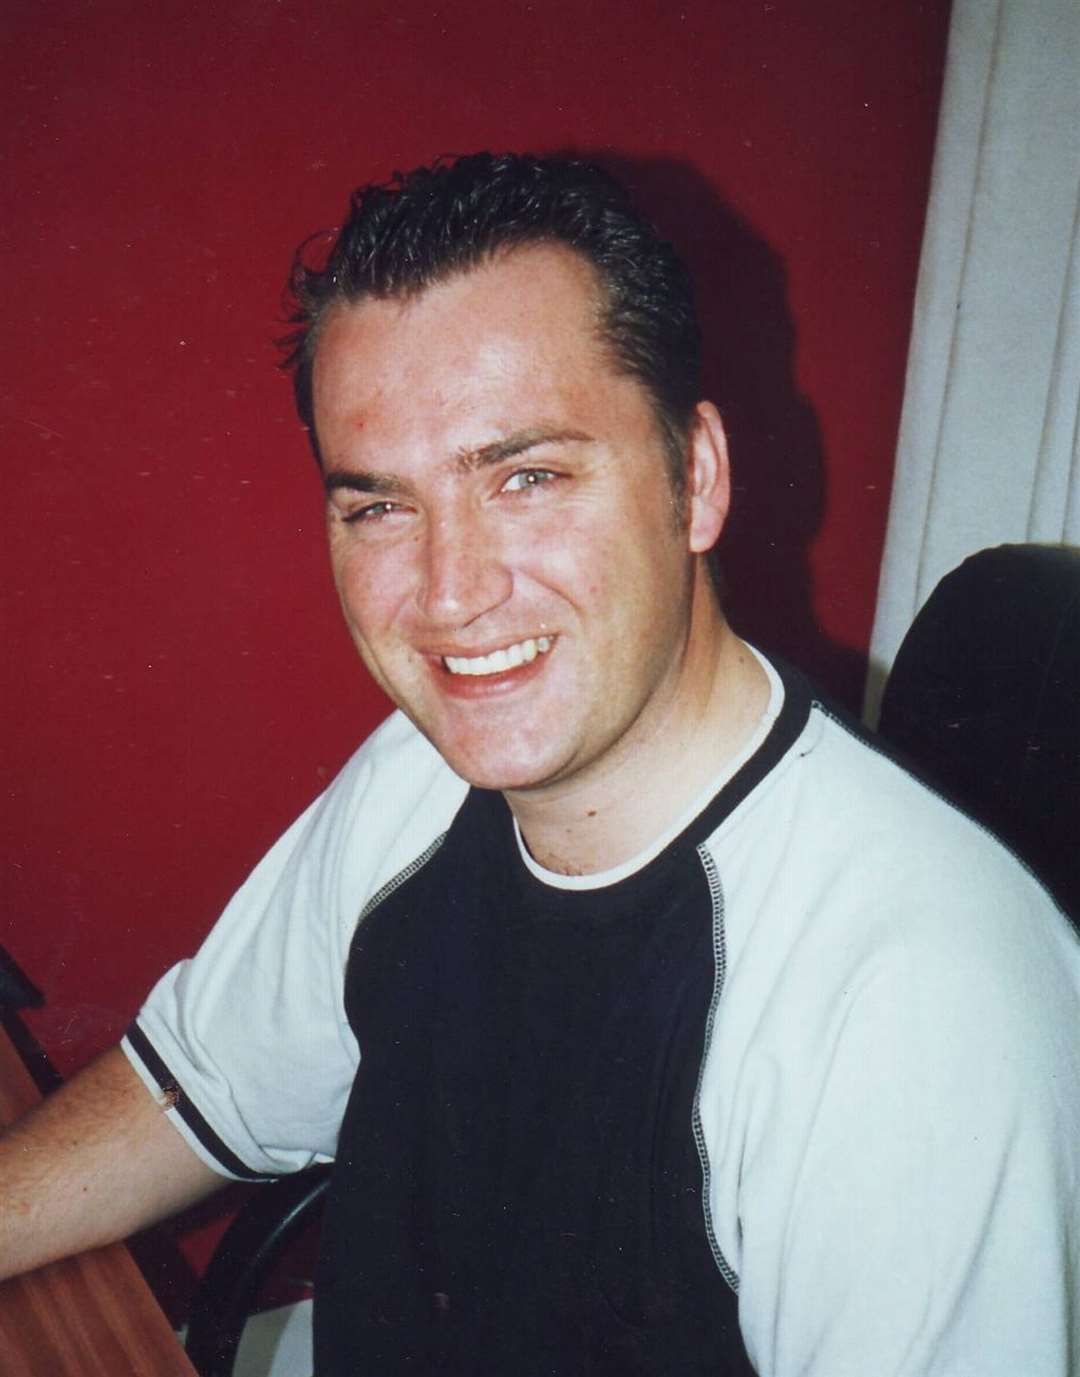 Concerns growing for the safety of graphic designer Martin Leathead, 43, who went missing from his home in Upper Dane Road, Margate, on the stormy night of February 13.